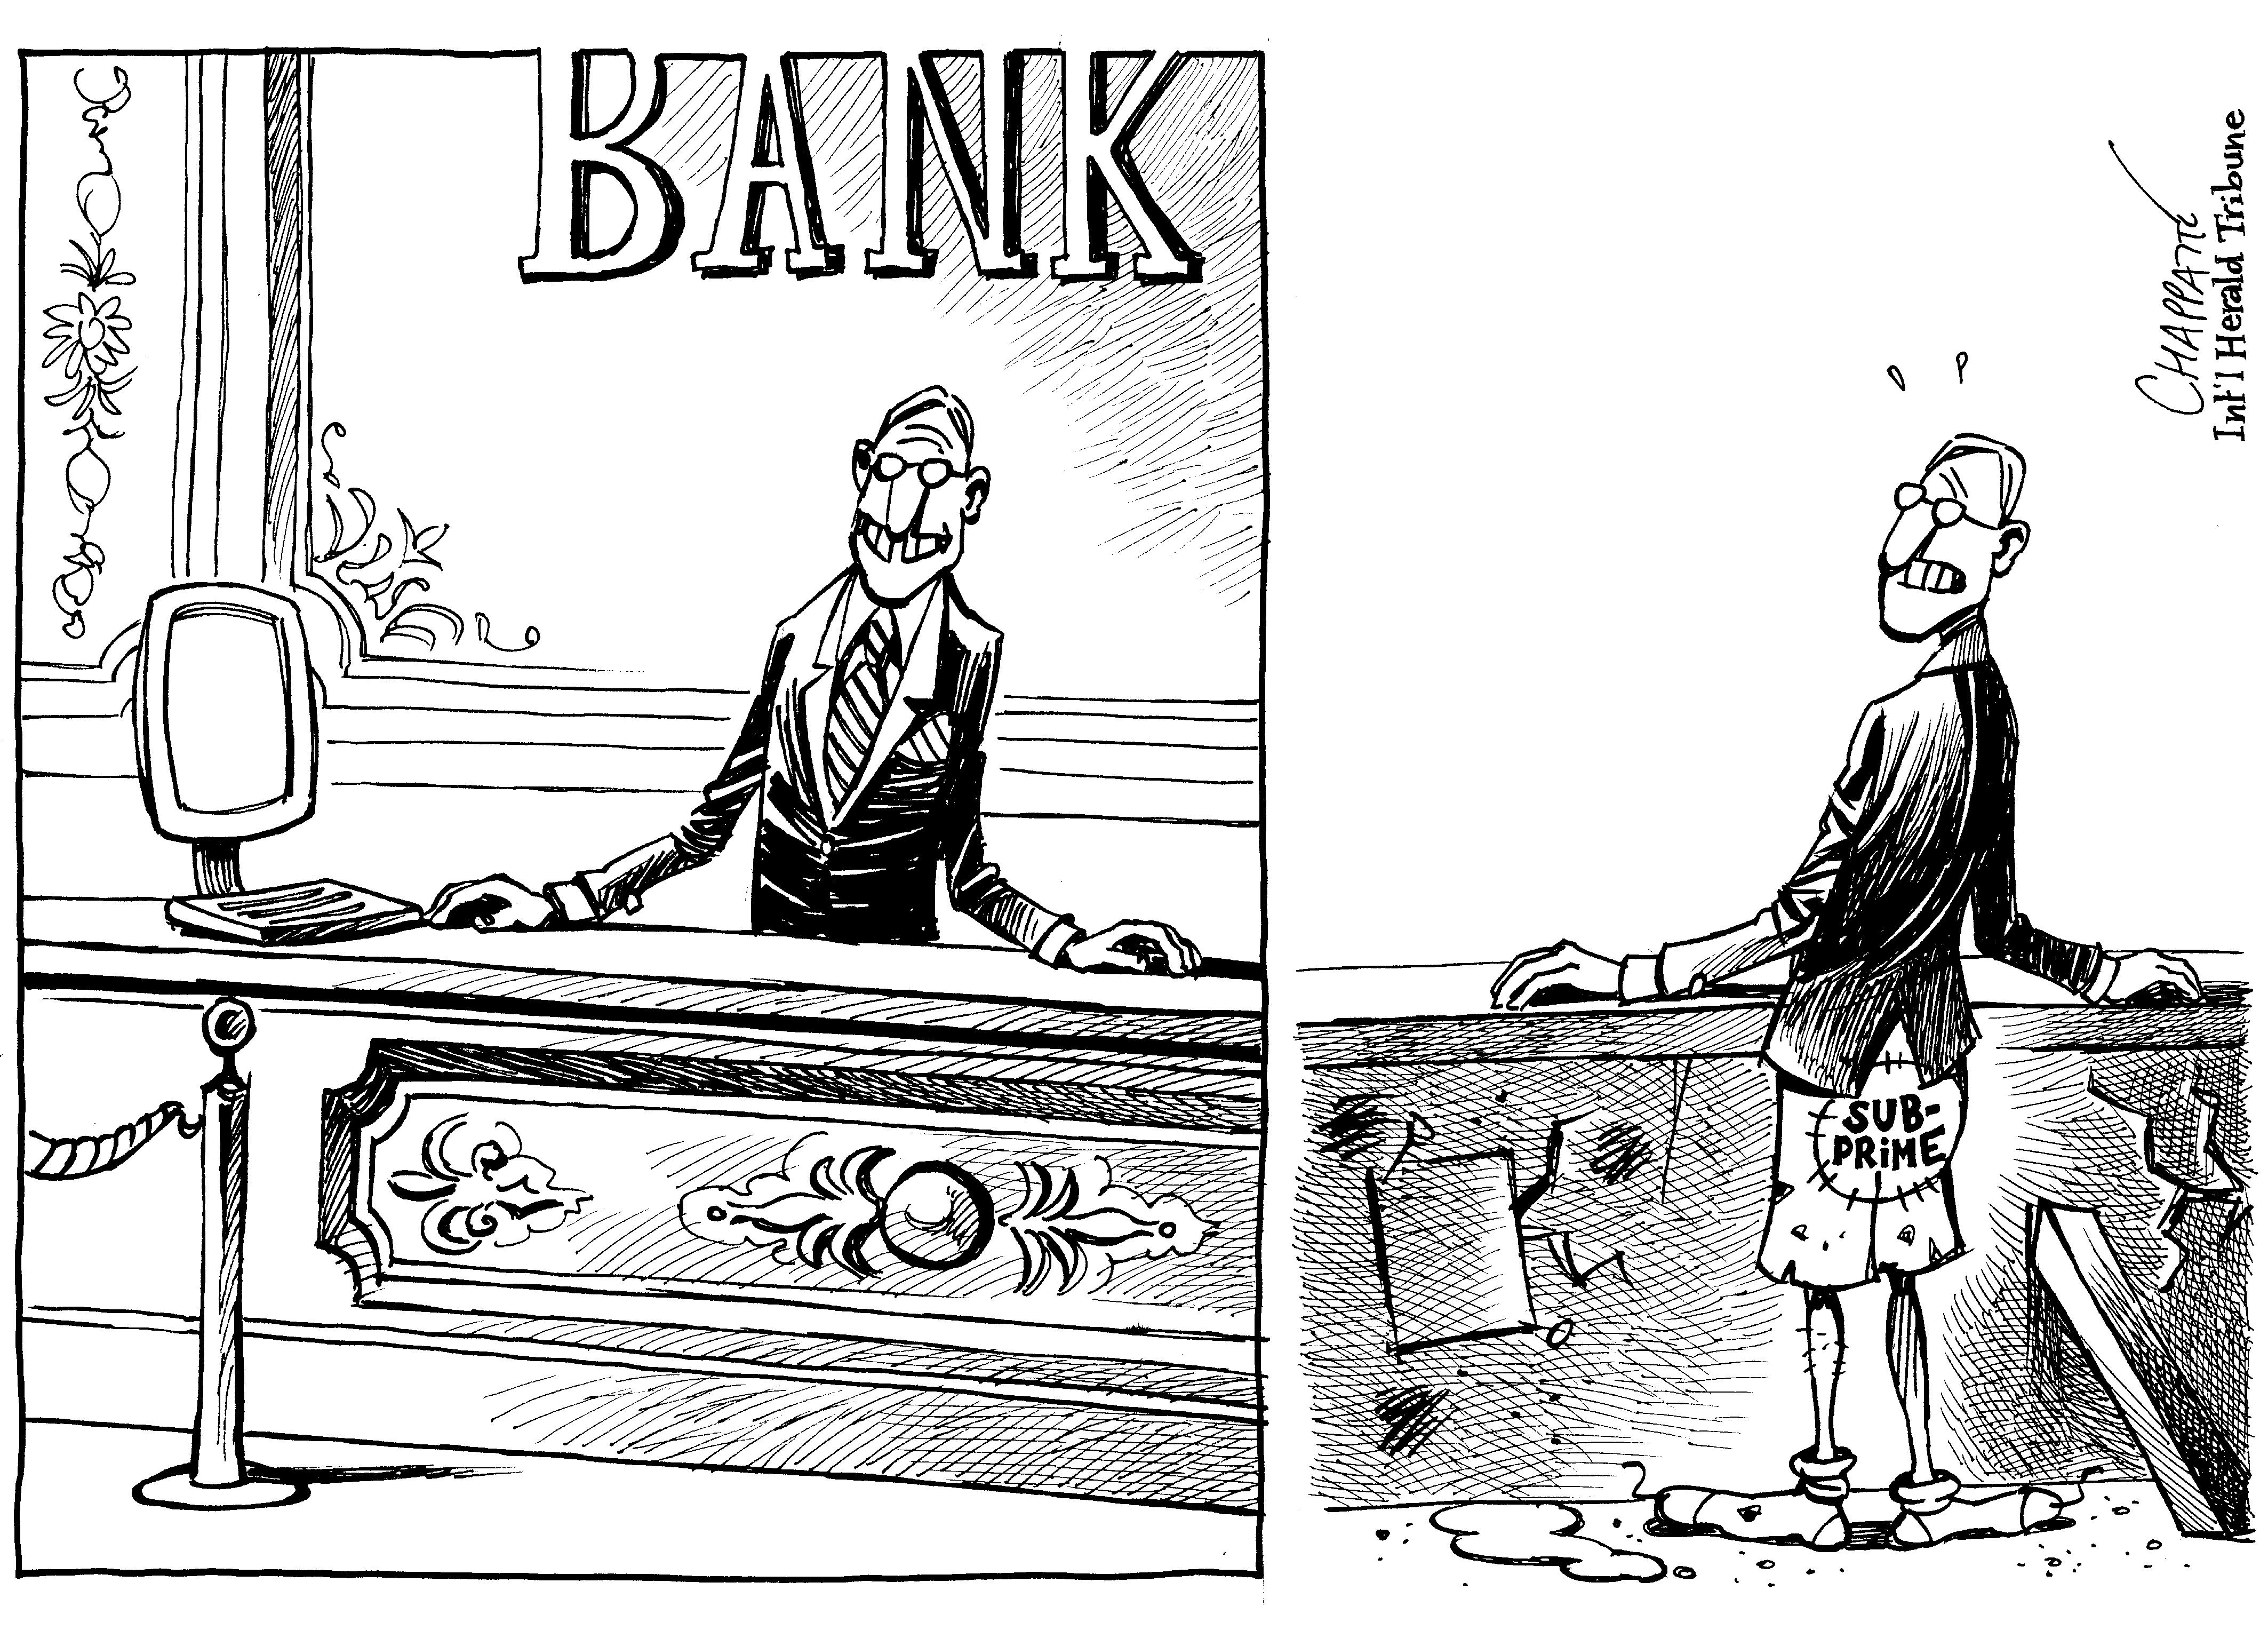 Banks caught in the subprime mess